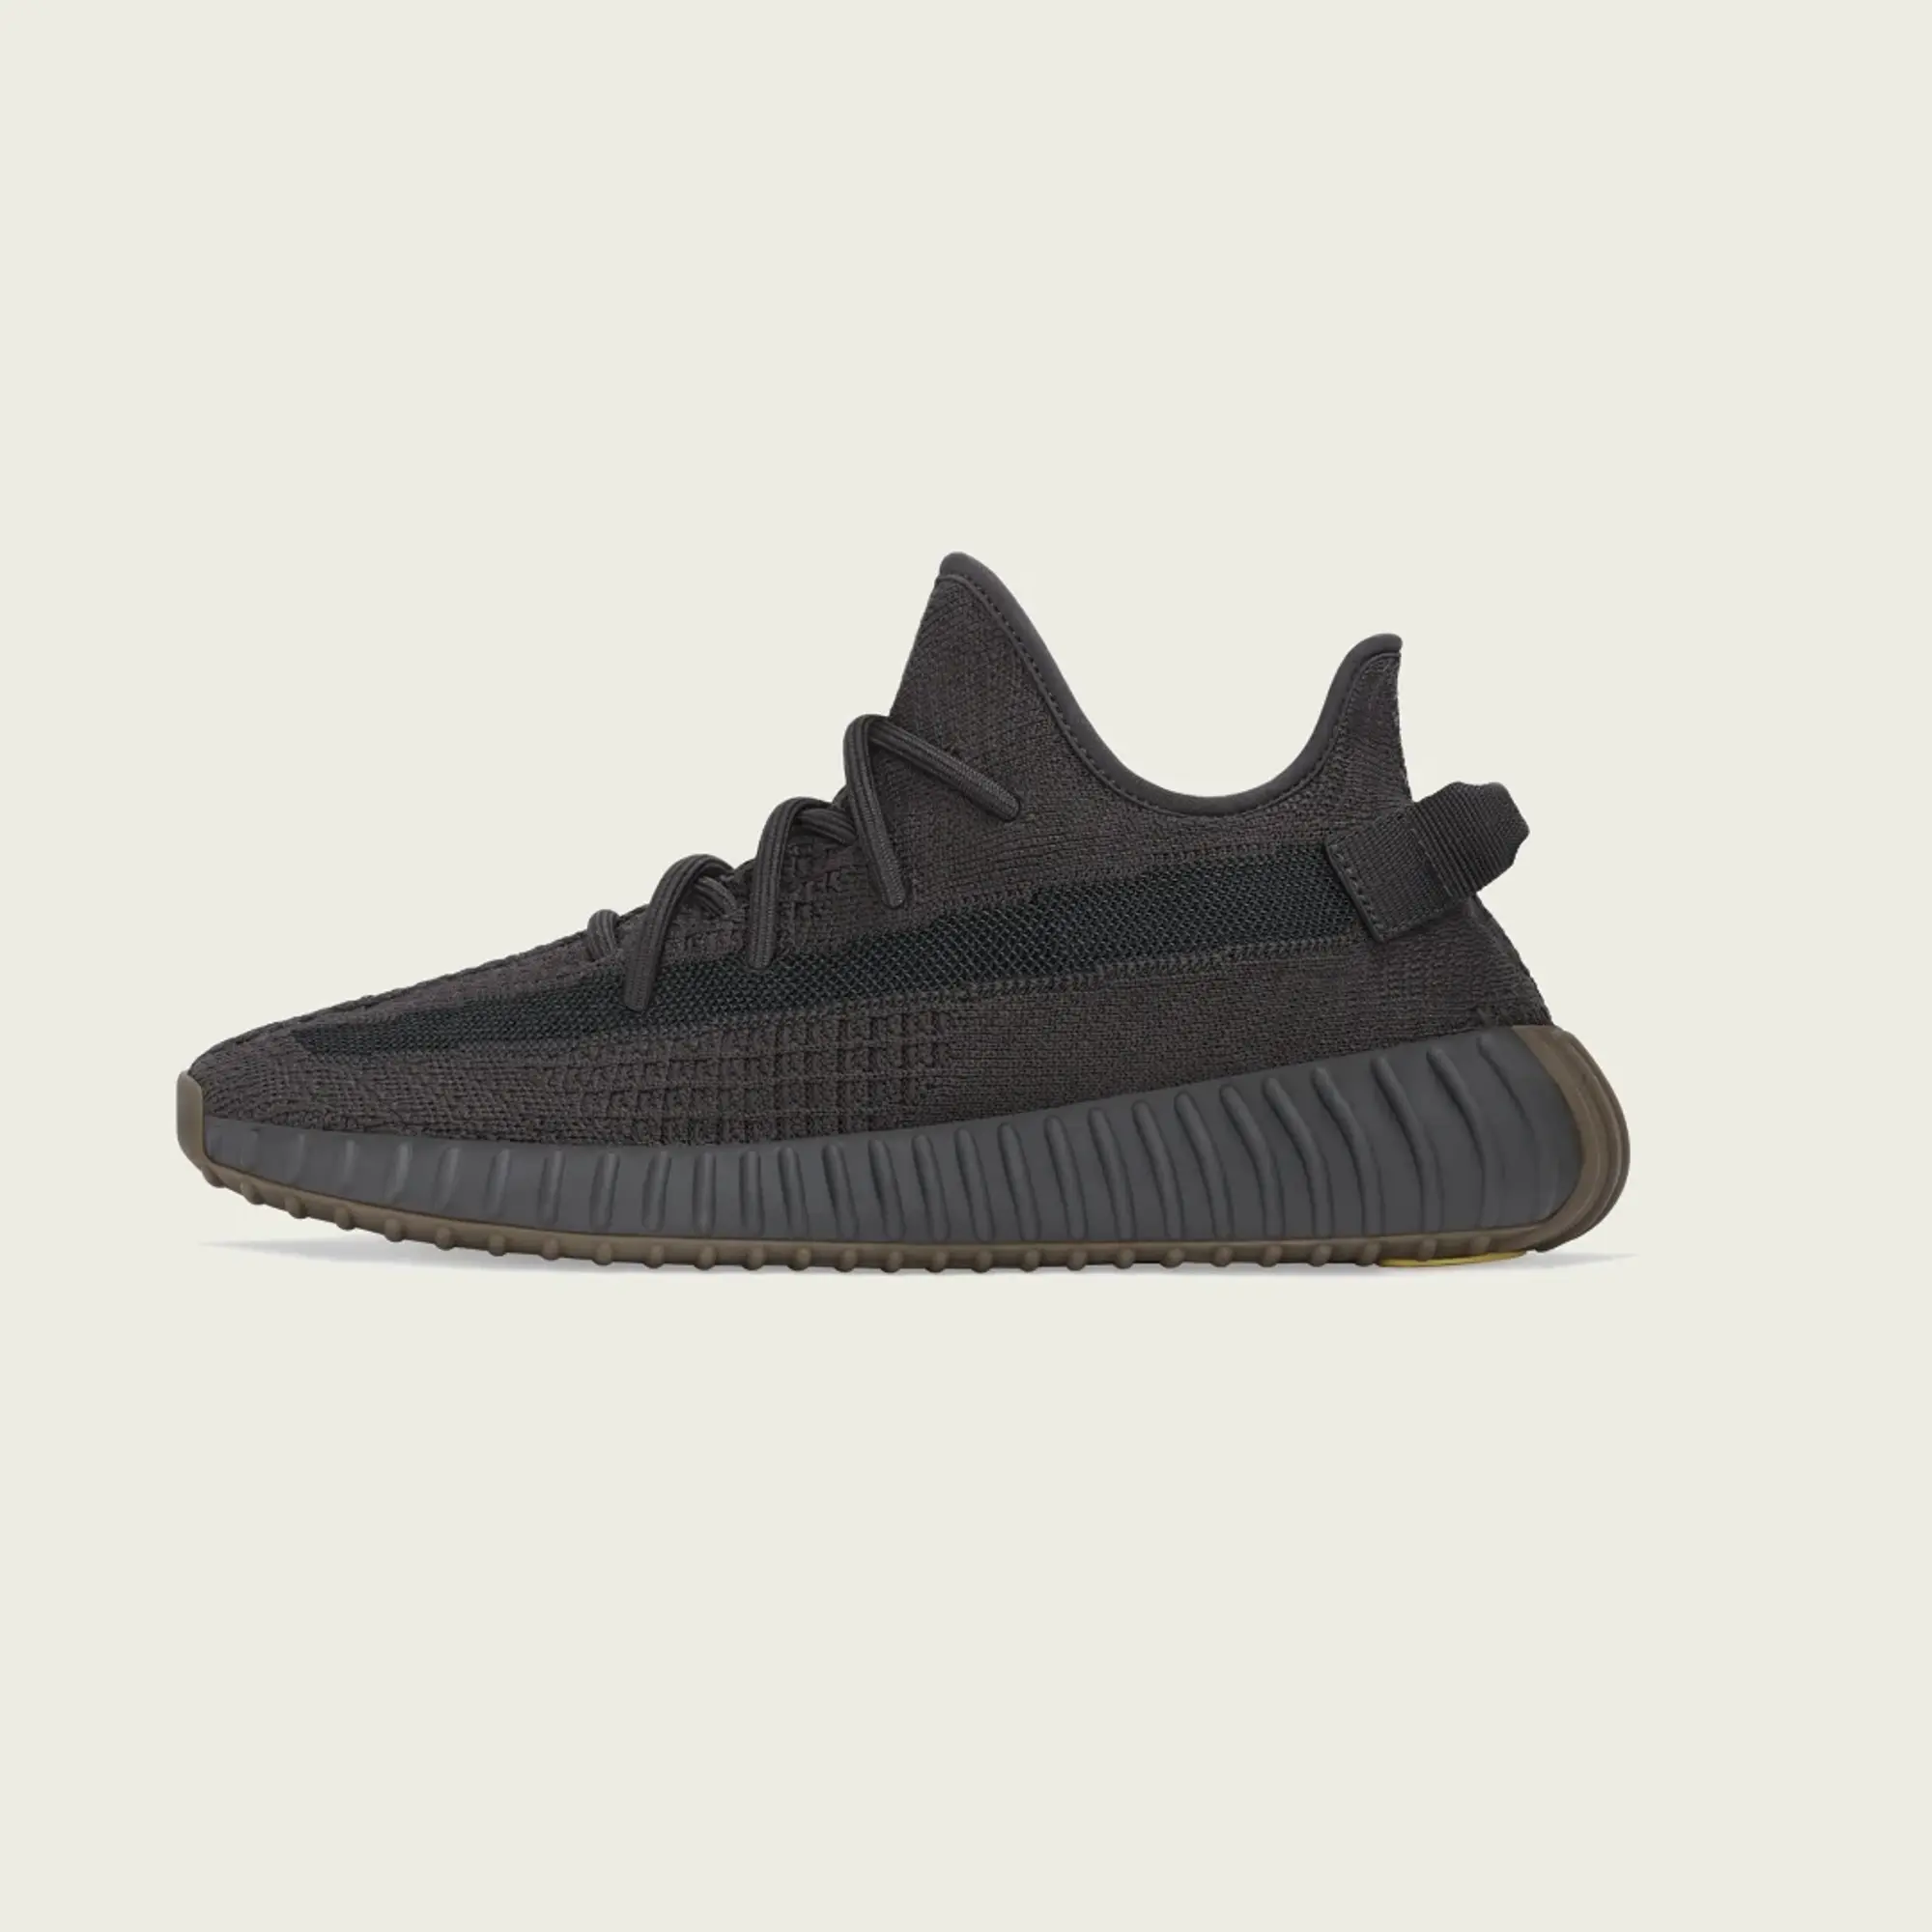 adidas Yeezy Boost 350 V2 Cinder Shoes